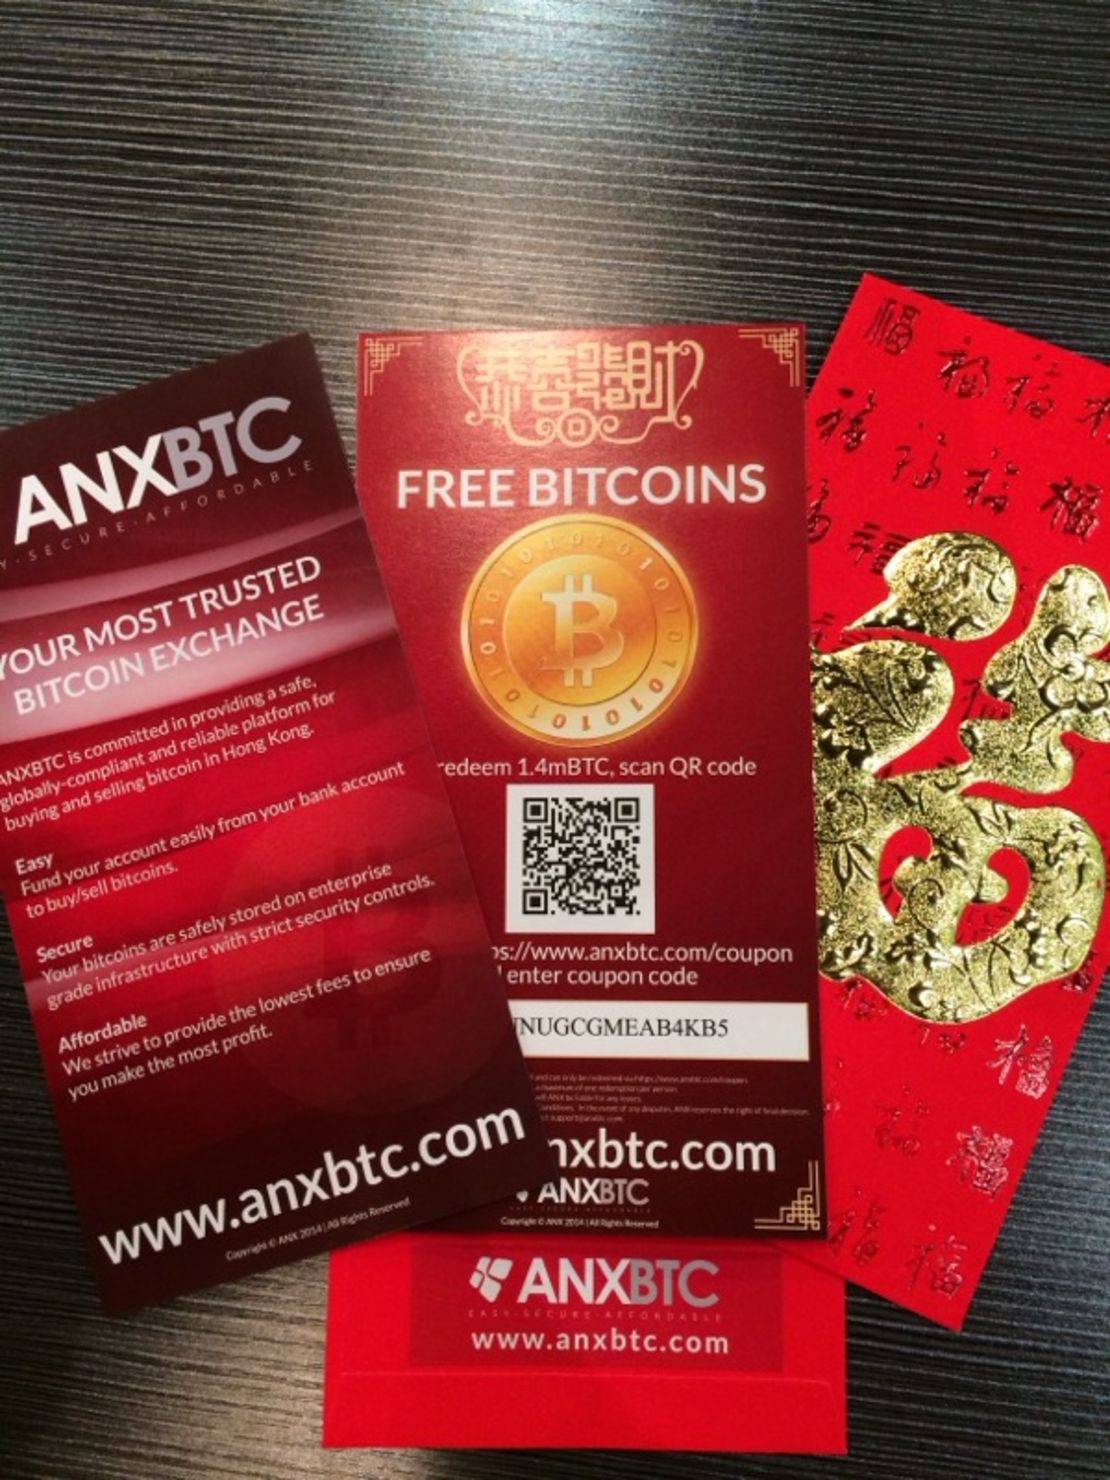 ANX Bitcoin vouchers were handed out to passersby in Hong Kong during Lunar New Year